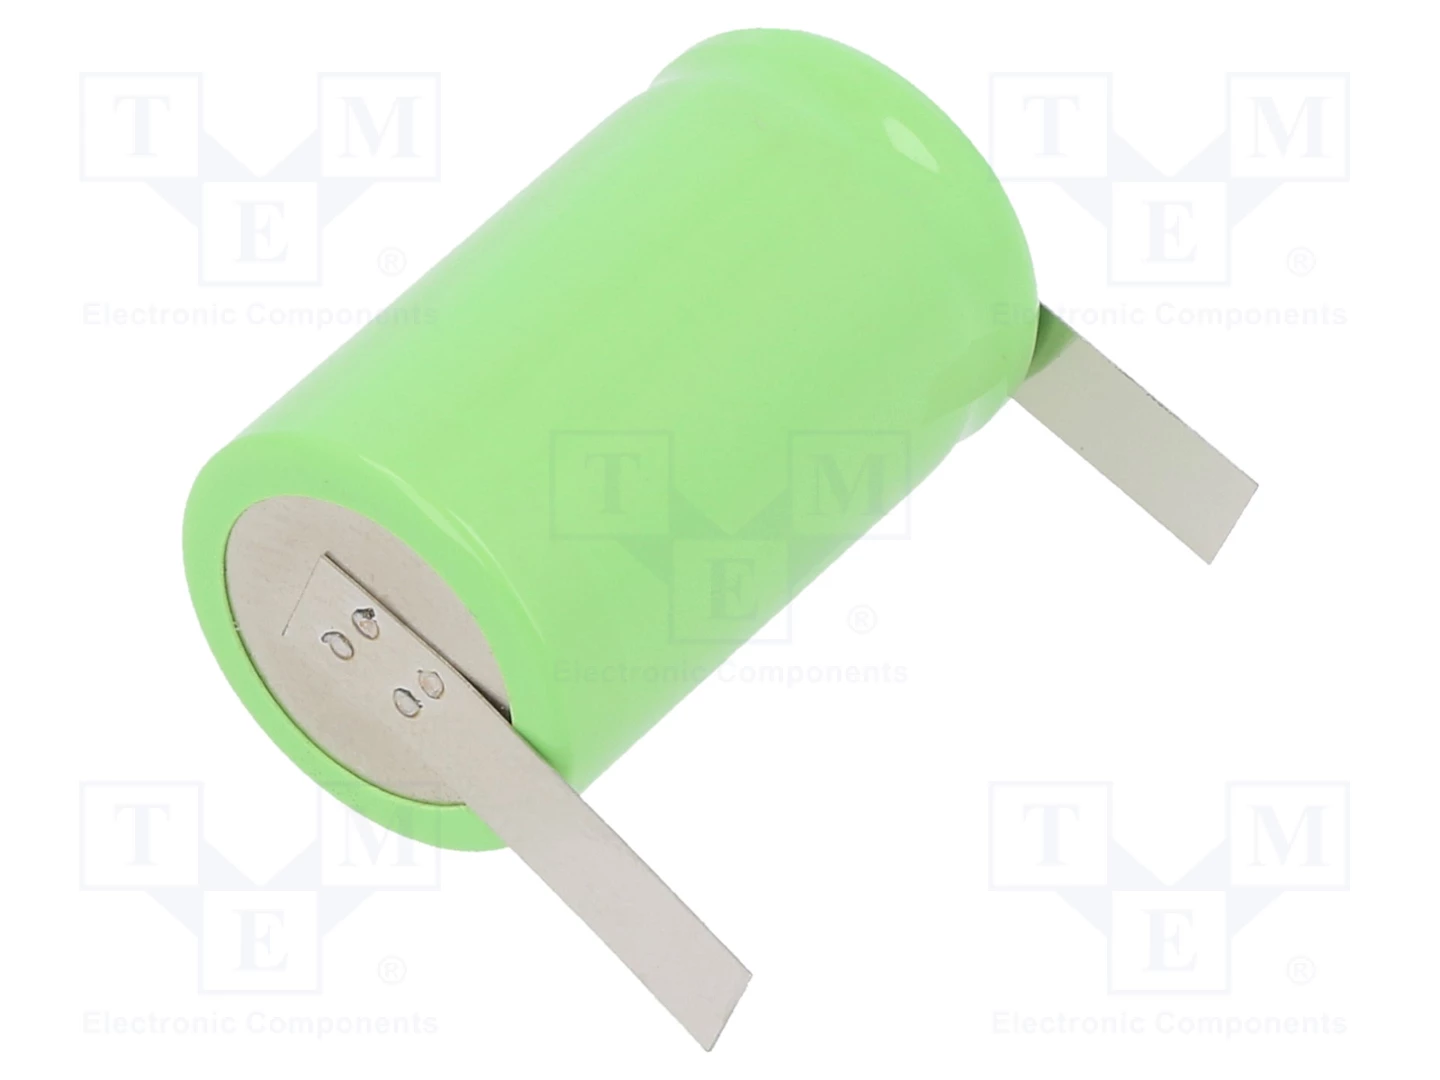   - Rechargeable cell Ni-MH 1,2V 900mAh dia 17x29mm